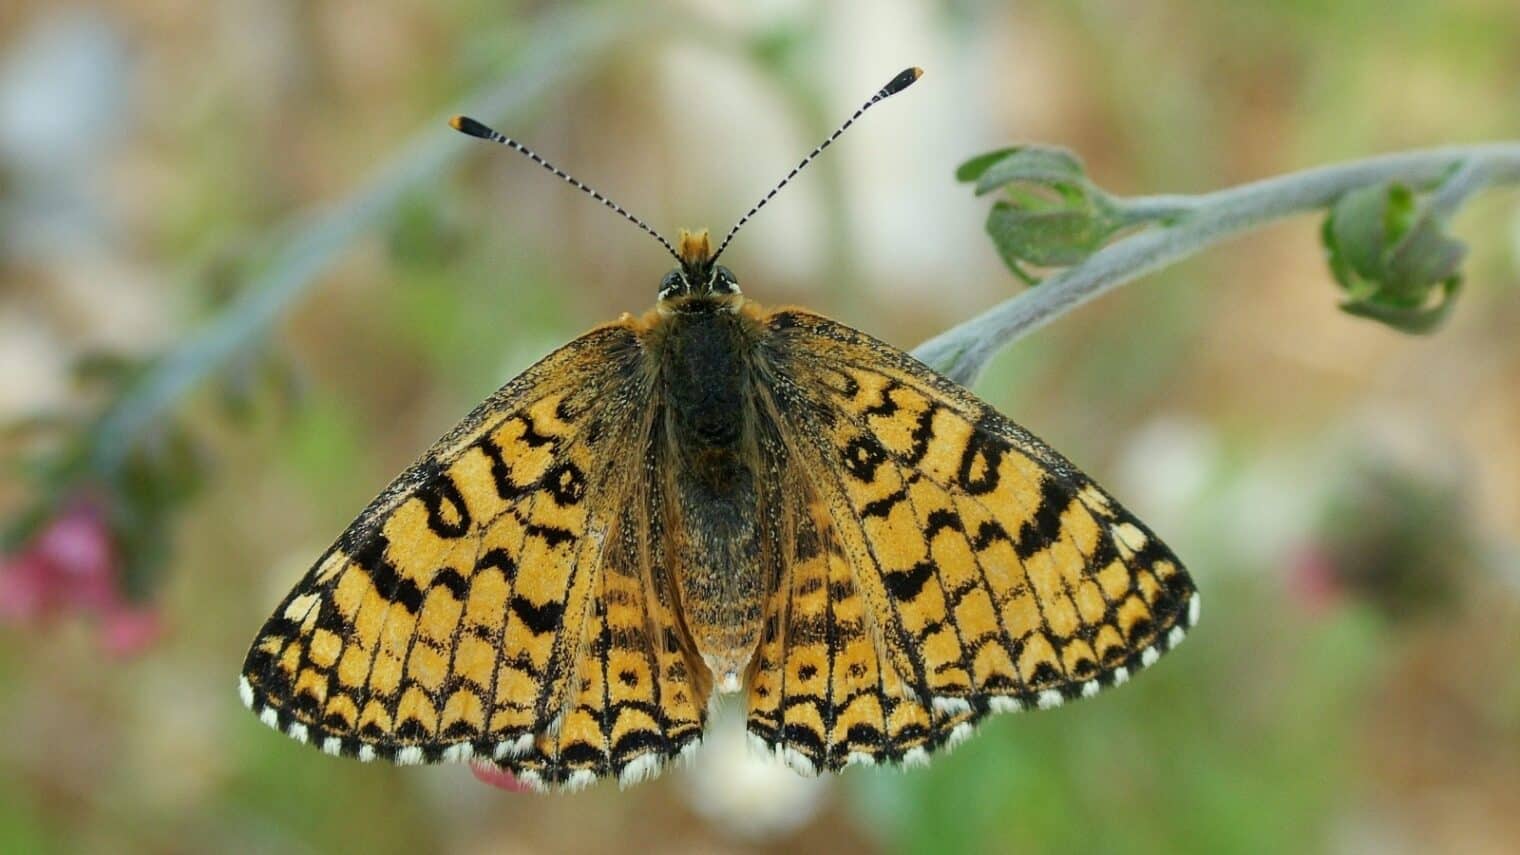 The Glanville fritillary butterfly species. Photo by Ofir Tomer